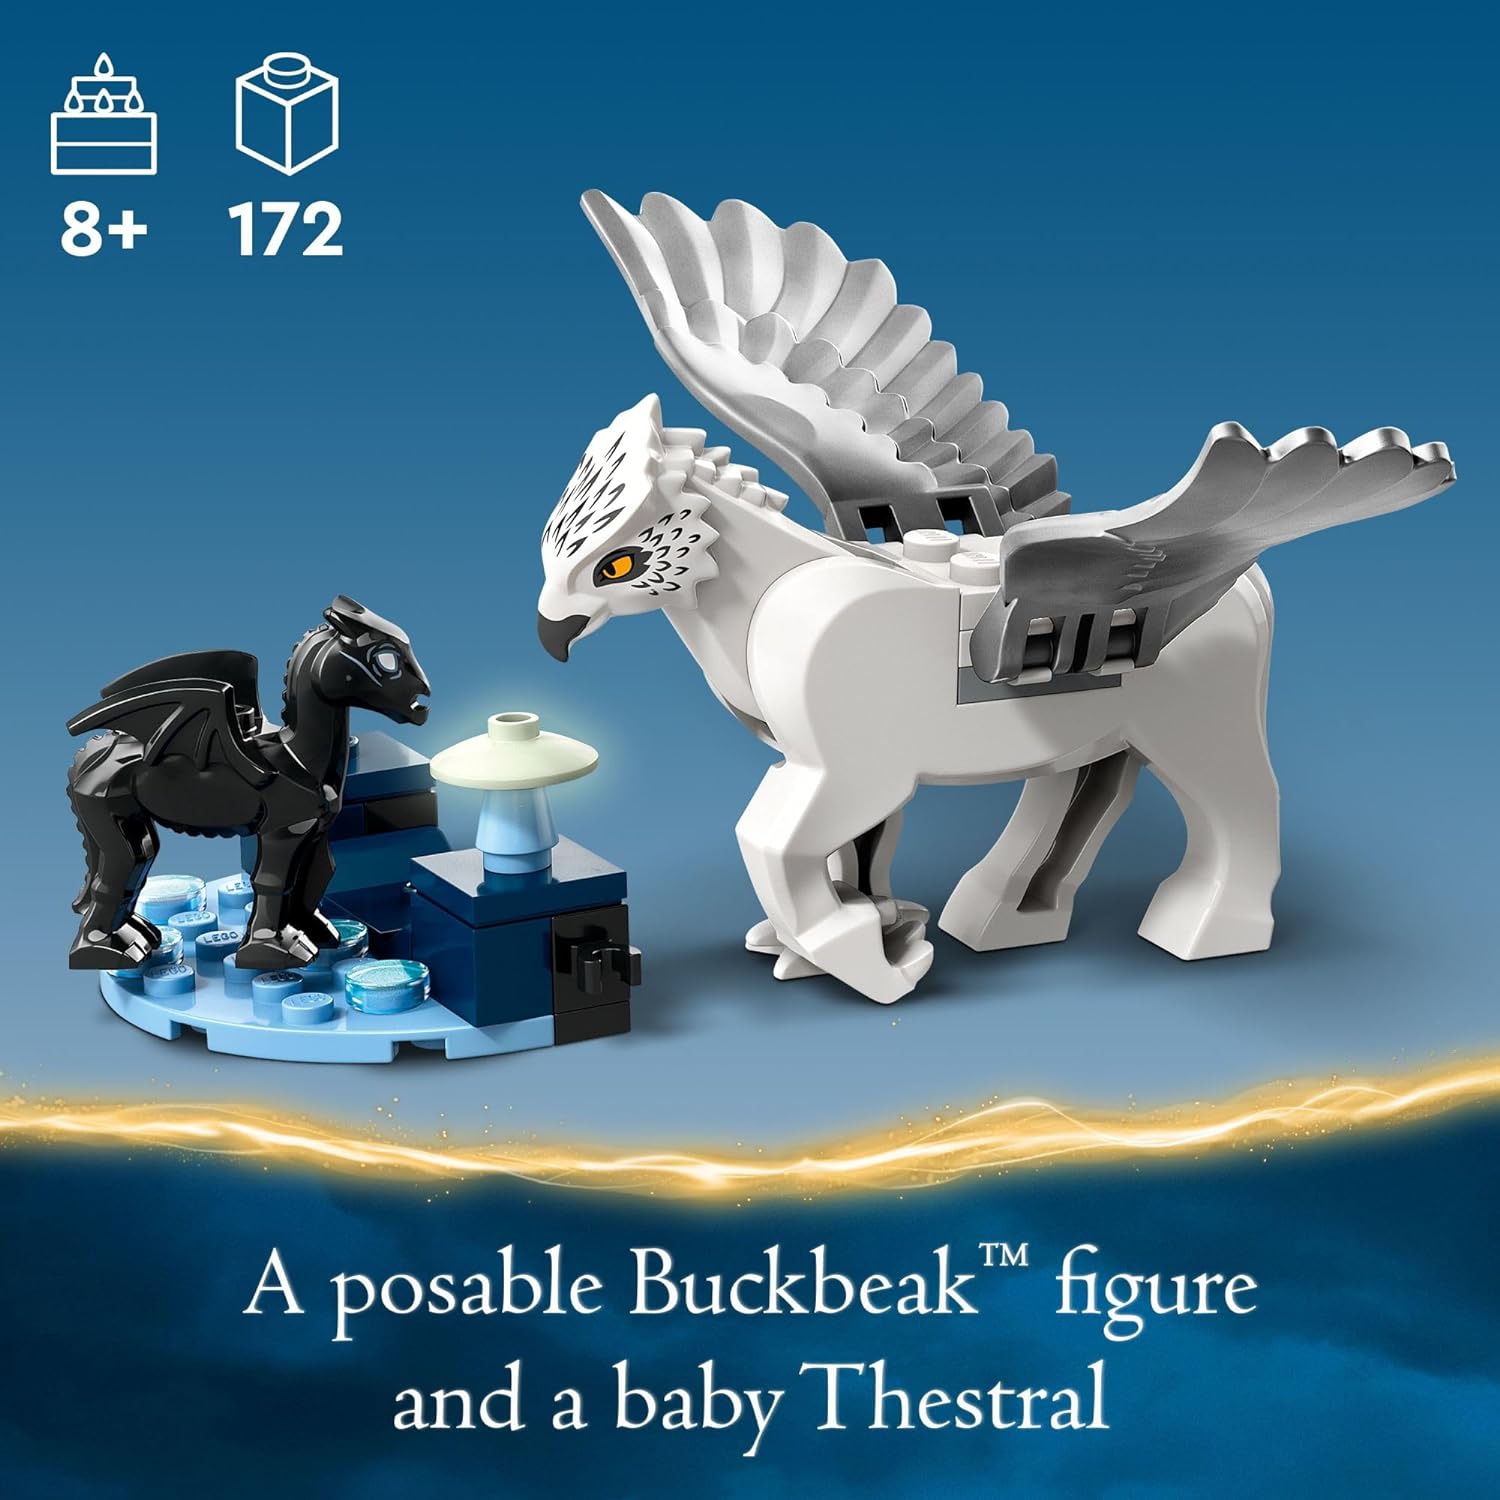 LEGO 76432 Harry Potter Forbidden Forest: Magical Creatures, Glow in The Dark Toy for Kids with Buckbeak and Thestral Fantasy Animal Figures.